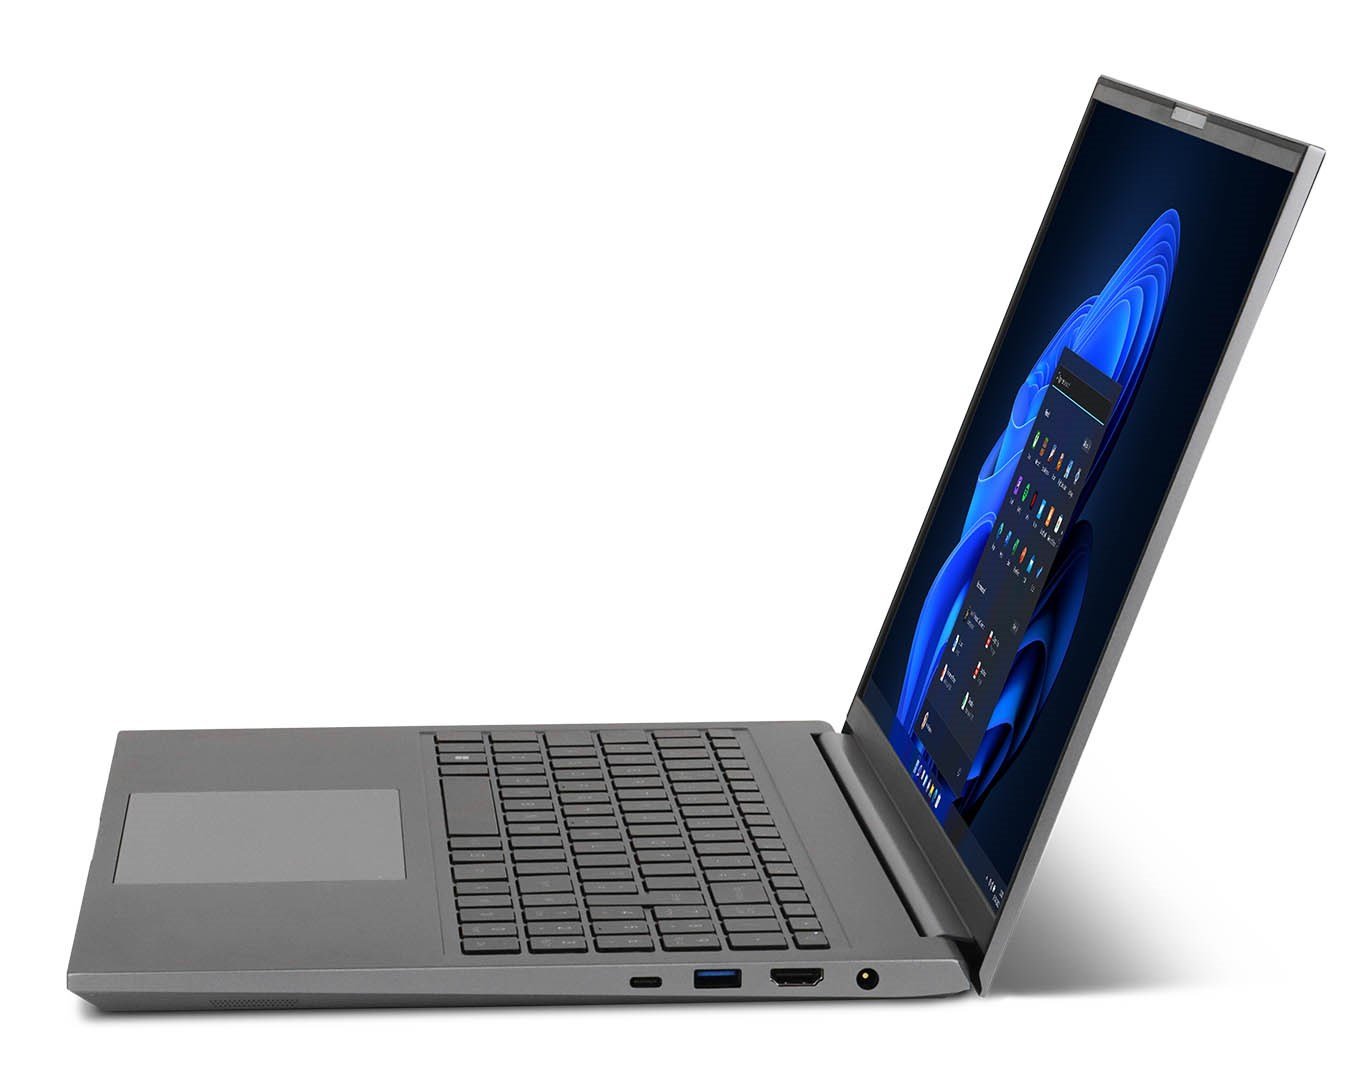 The Chillblast Phantom laptop viewed from the side, lid open